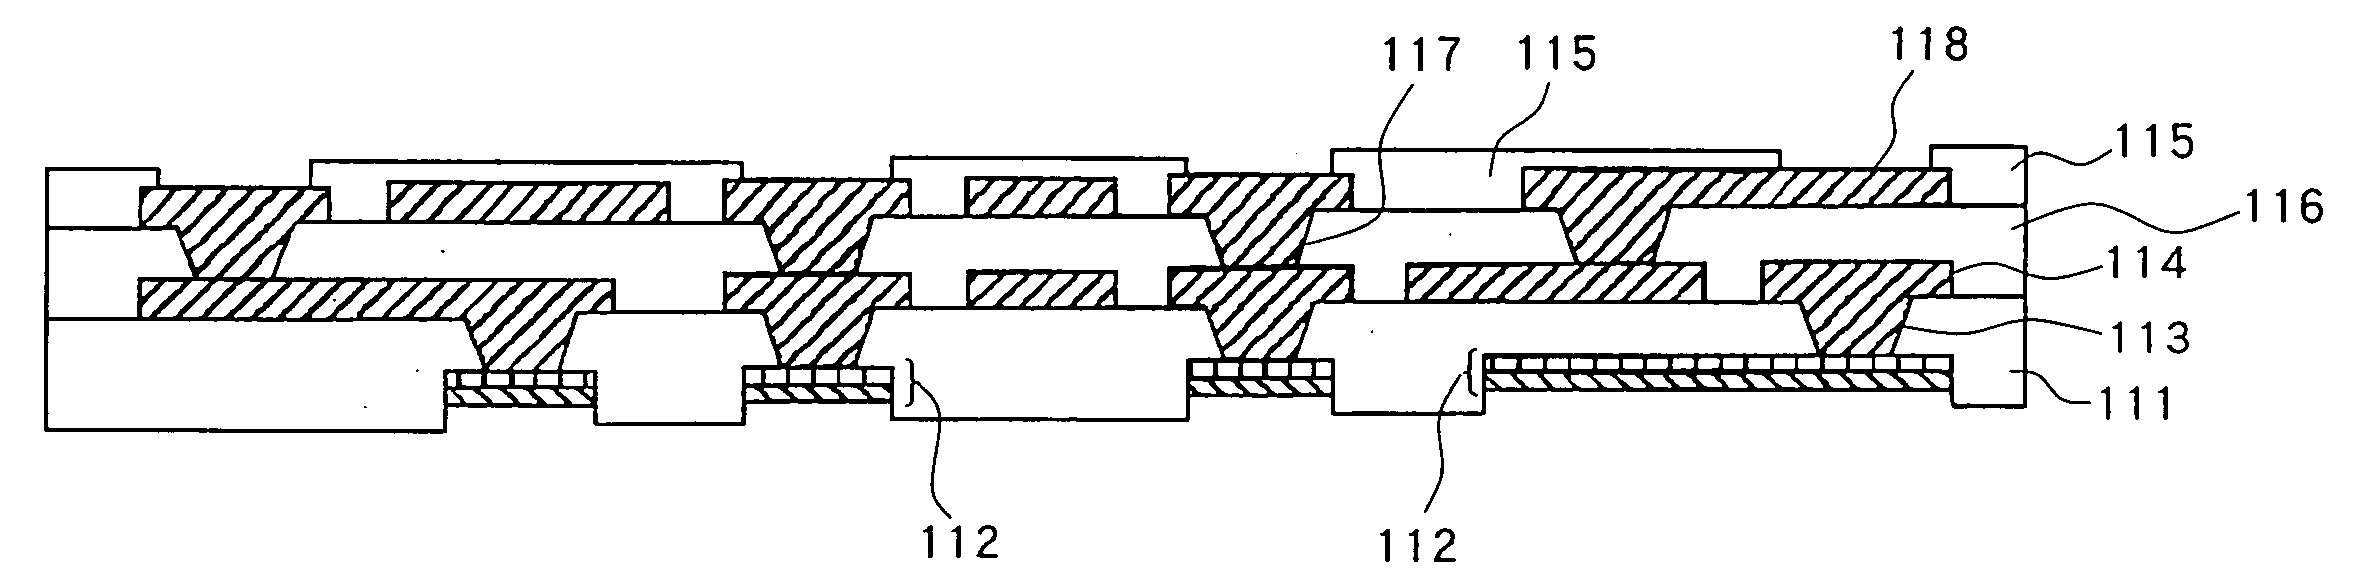 Interconnecting substrate and semiconductor device